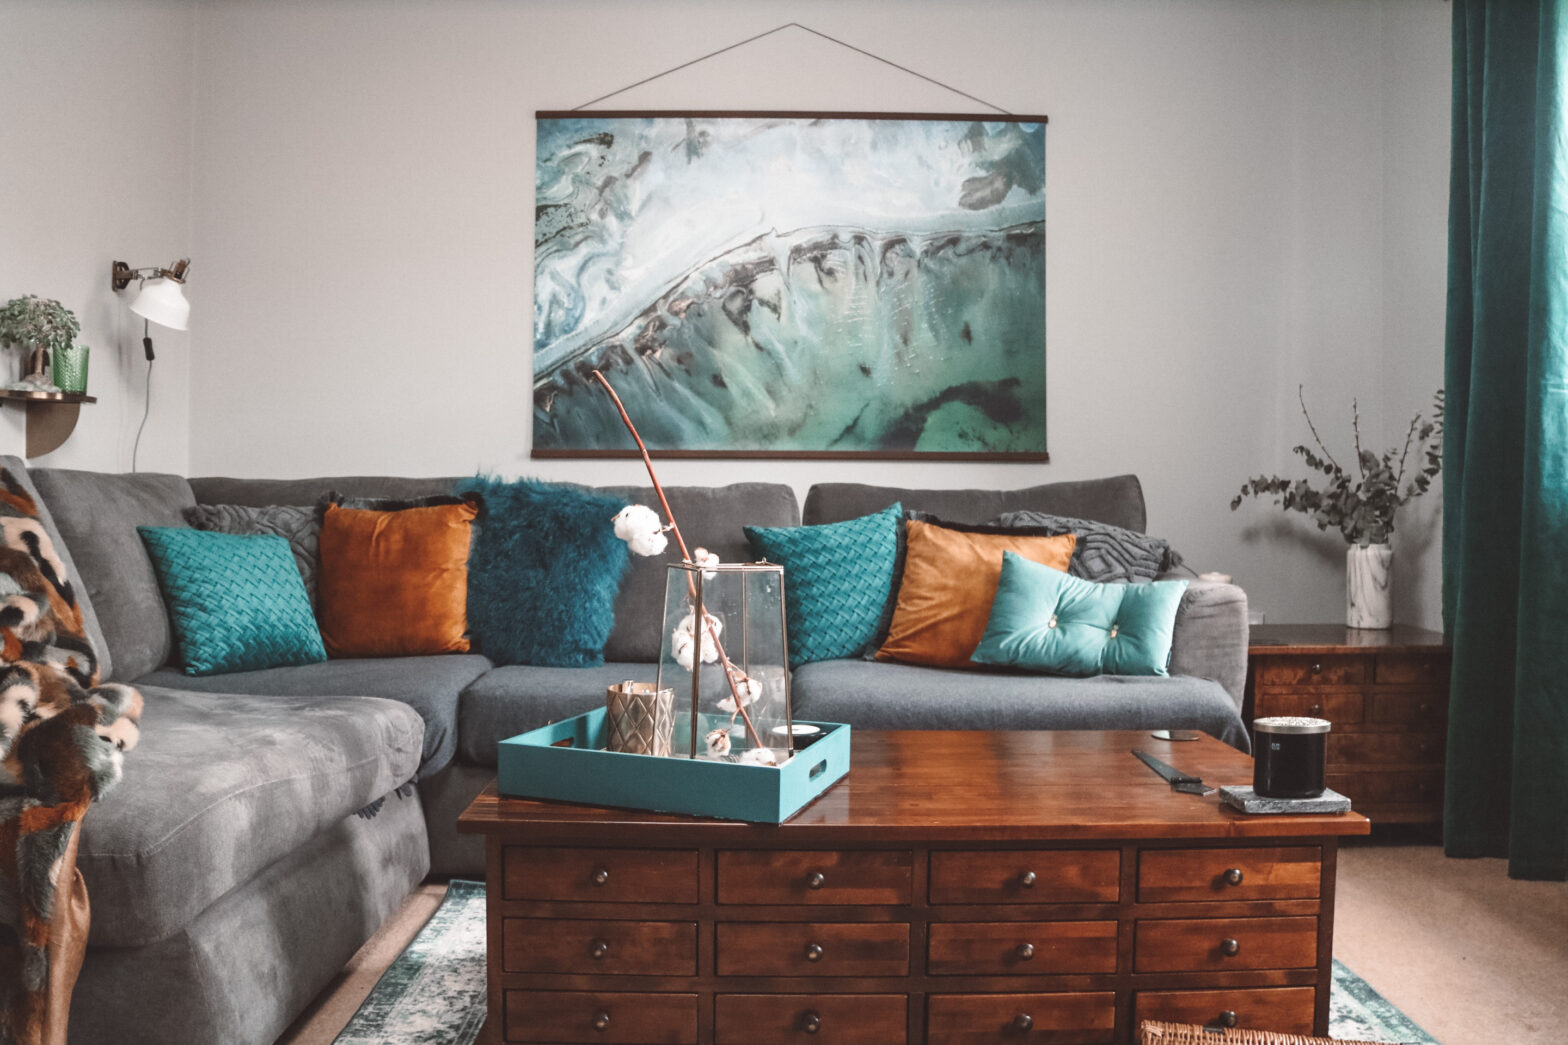 image of the sofa with coffee table in the foreground and photowall wall art behind it